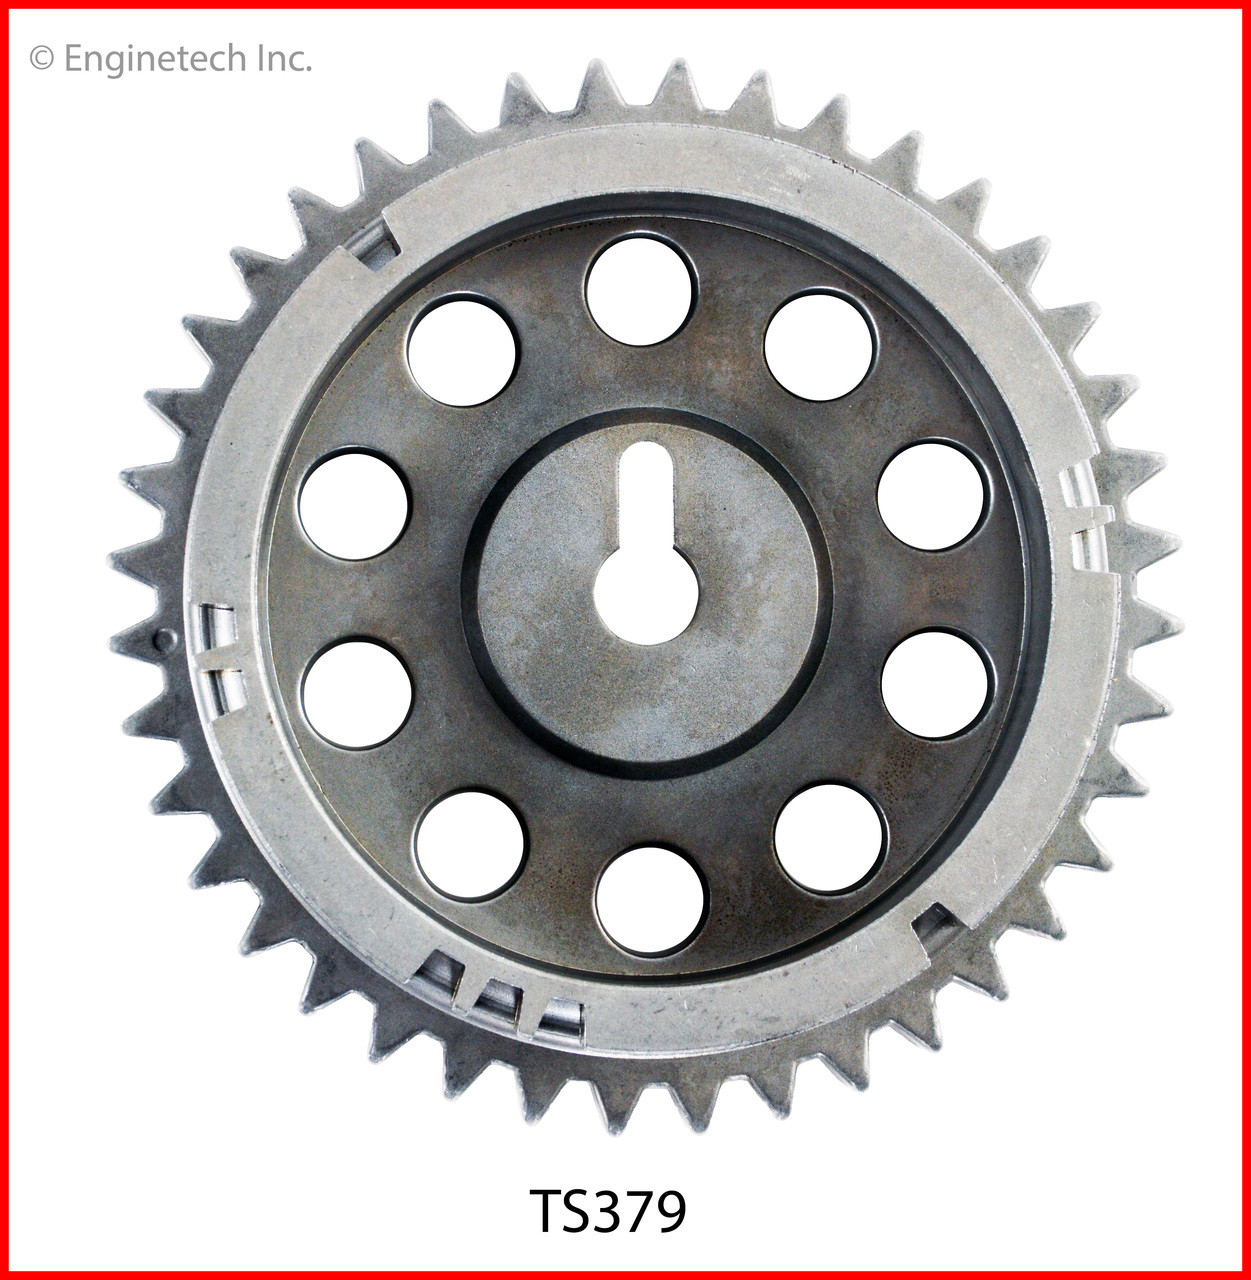 Timing Set - 1996 Plymouth Voyager 3.3L (TS379.H73)